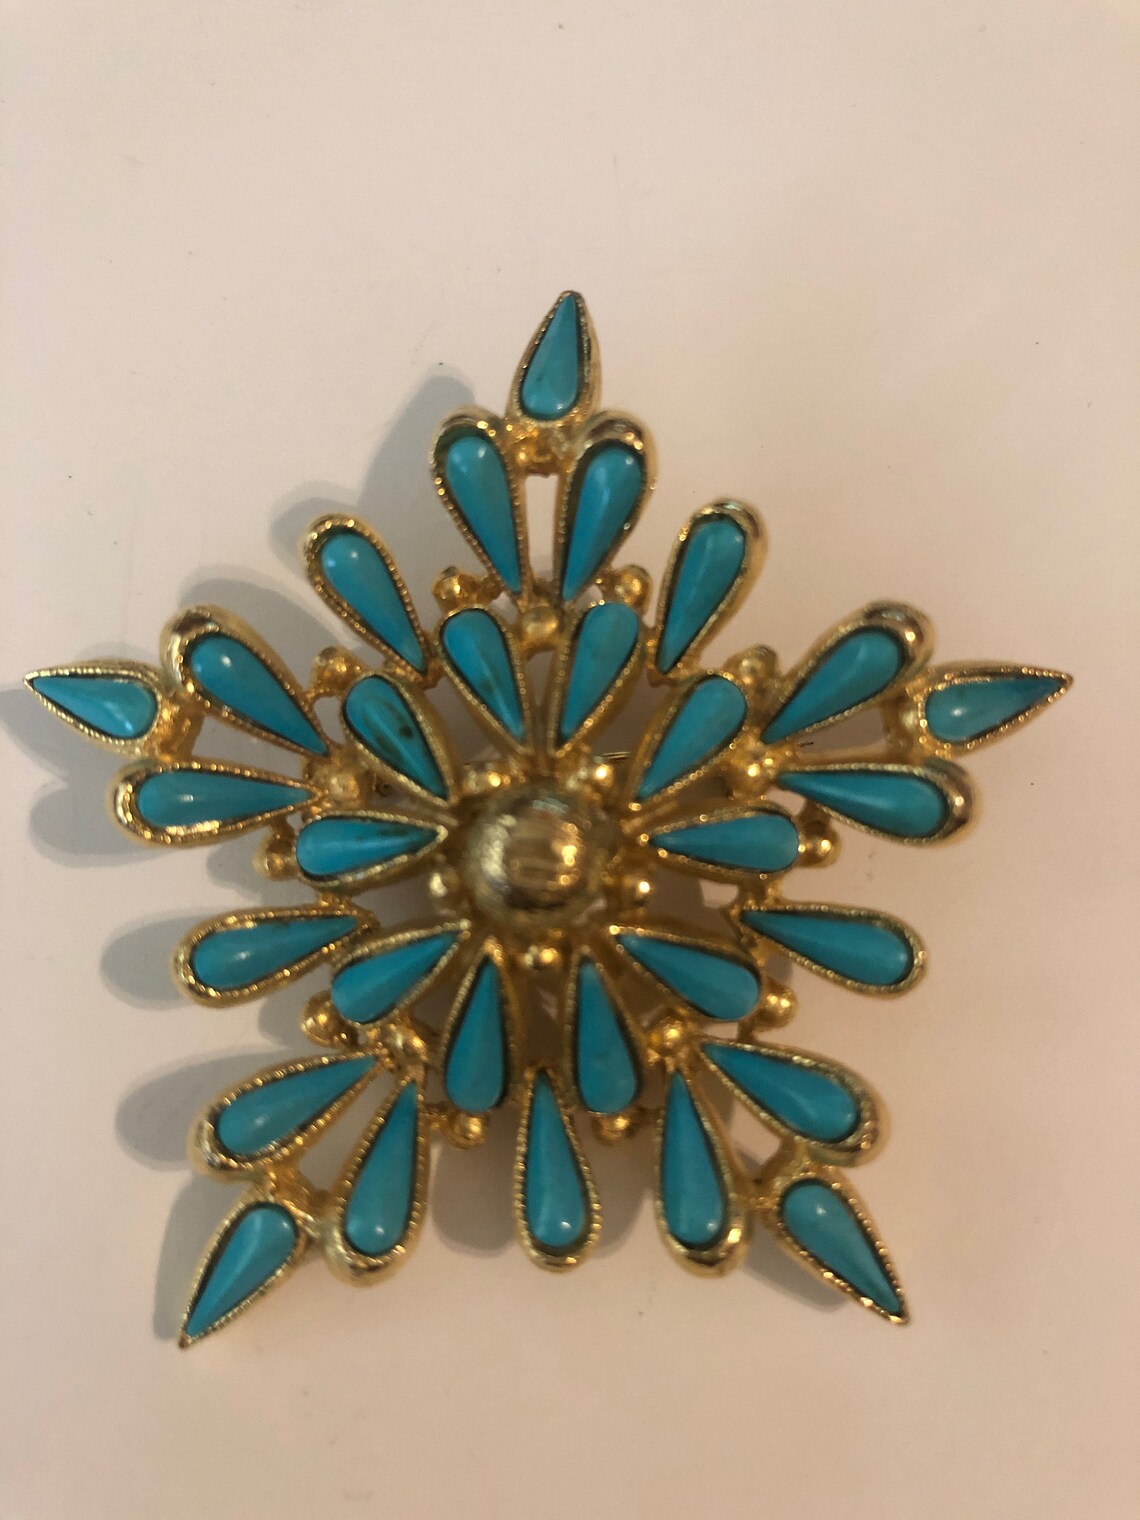 1960s Vintage BSK Brooch Faux Turquoise SNOWFLAKE in Gold - Etsy